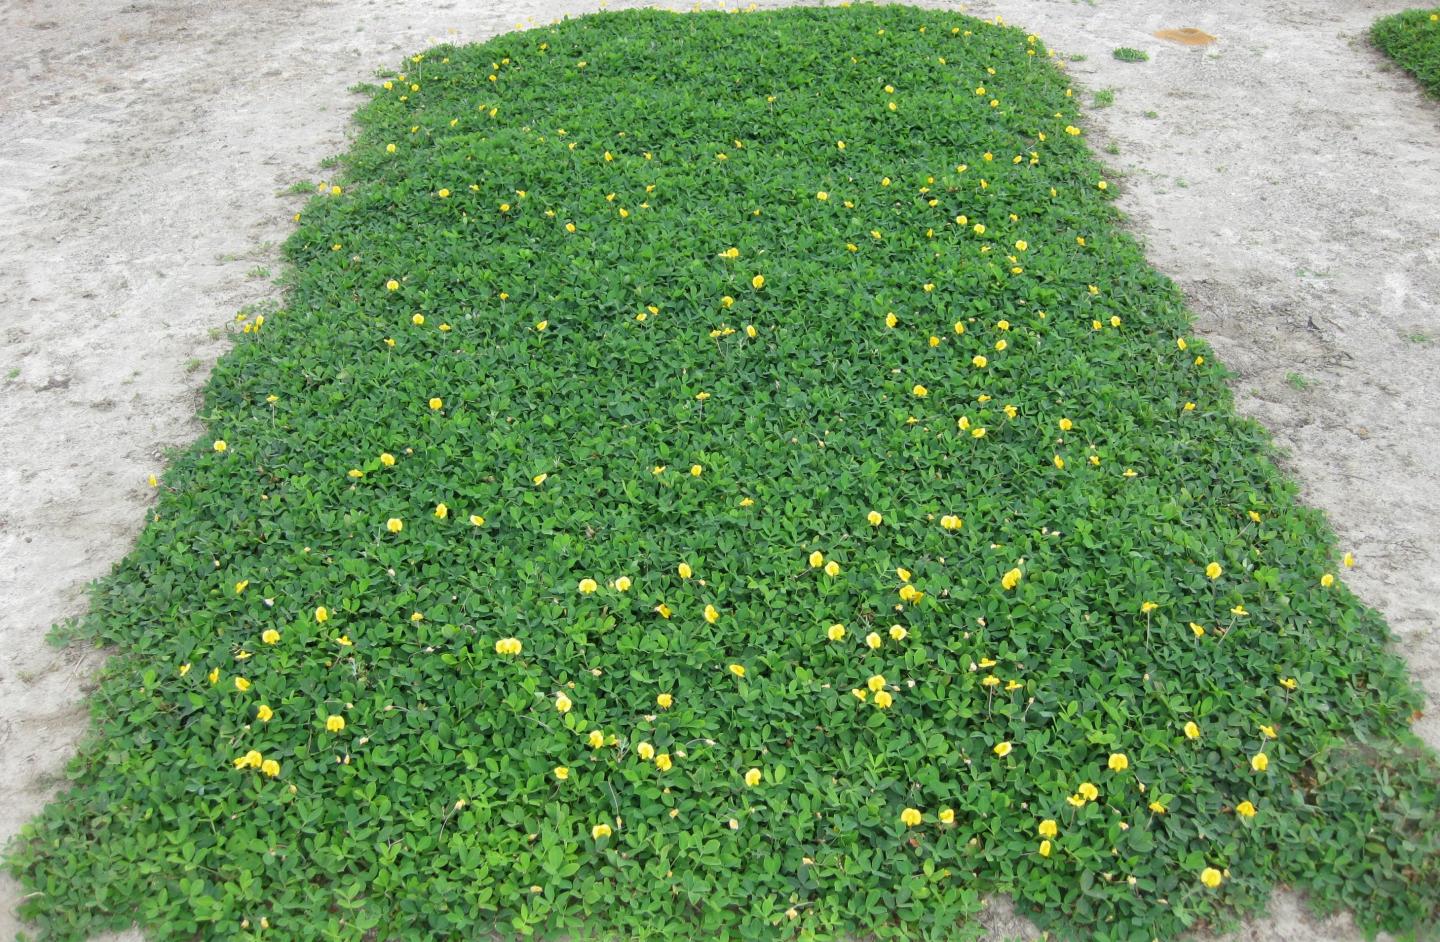 Forage Crop Promising as Ecologically Friendly Ornamental Groundcover